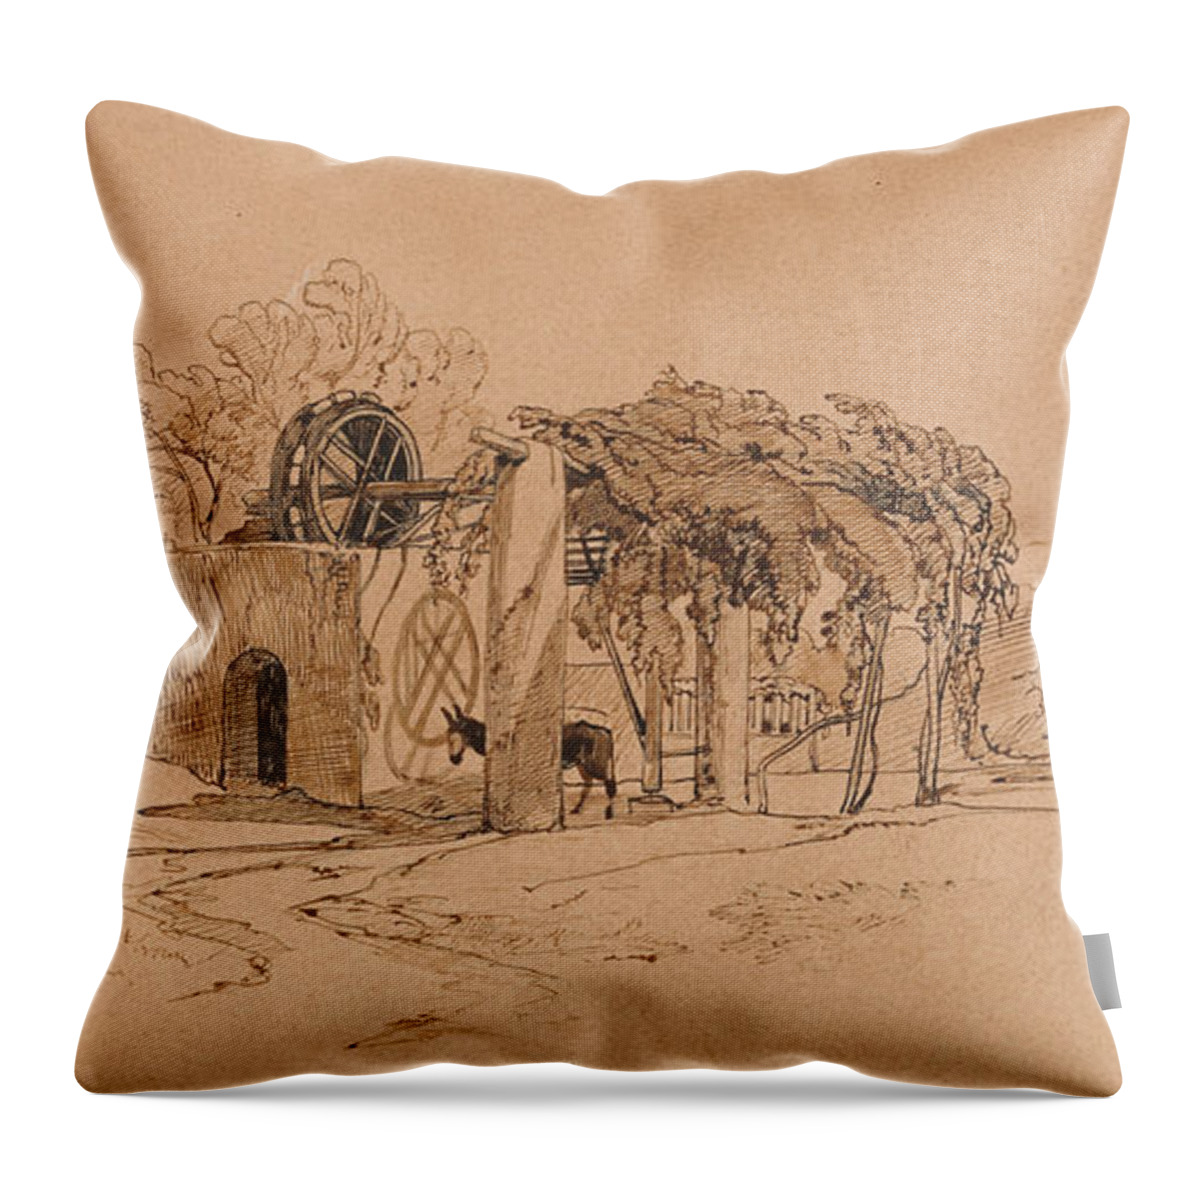 English Art Throw Pillow featuring the drawing Catania by Edward Lear